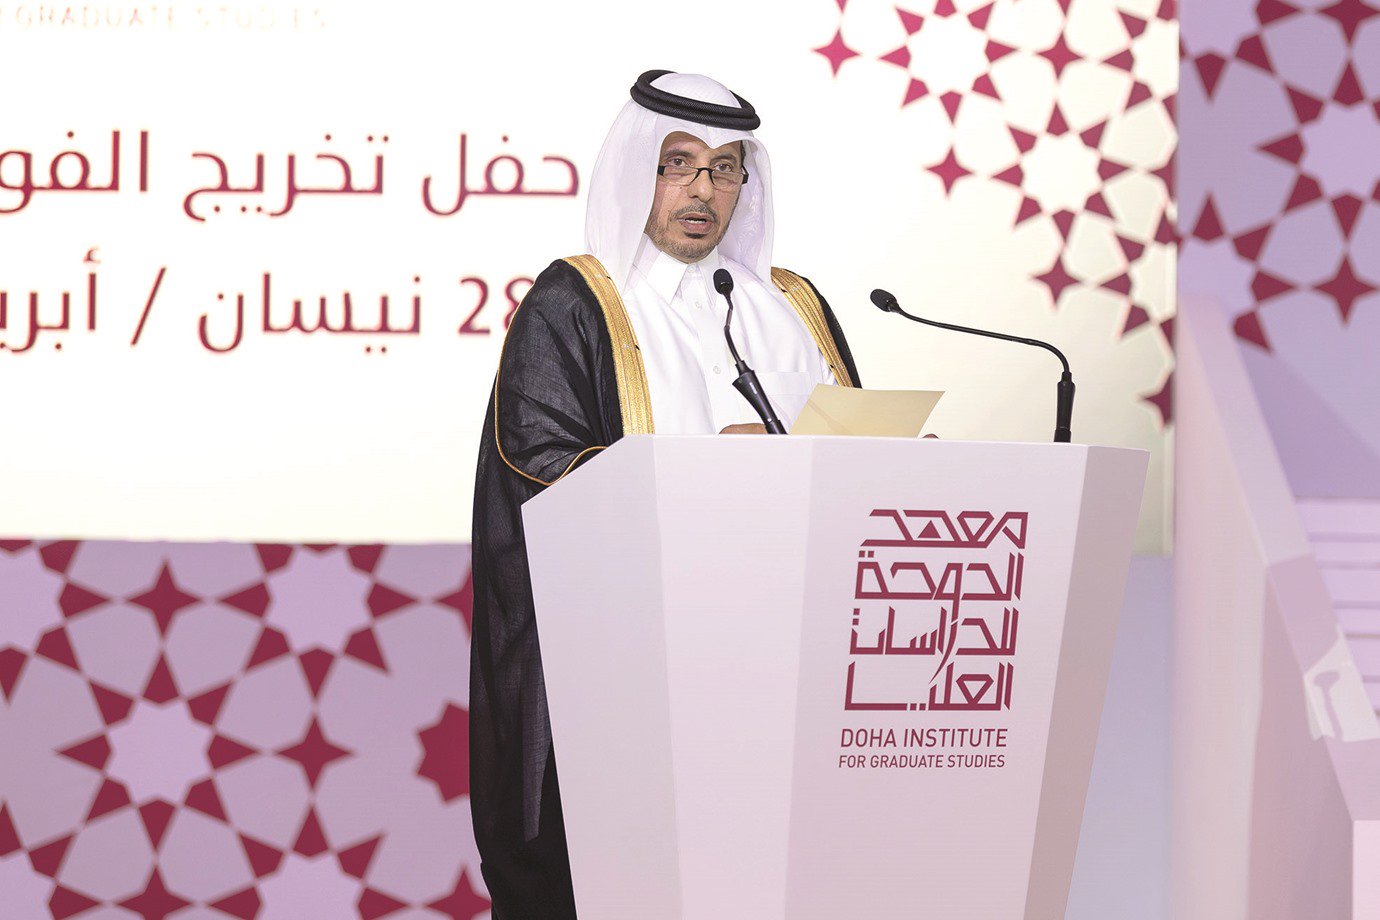 Prime Minister attends graduation of third batch of graduates of Doha Institute for Graduate Studies